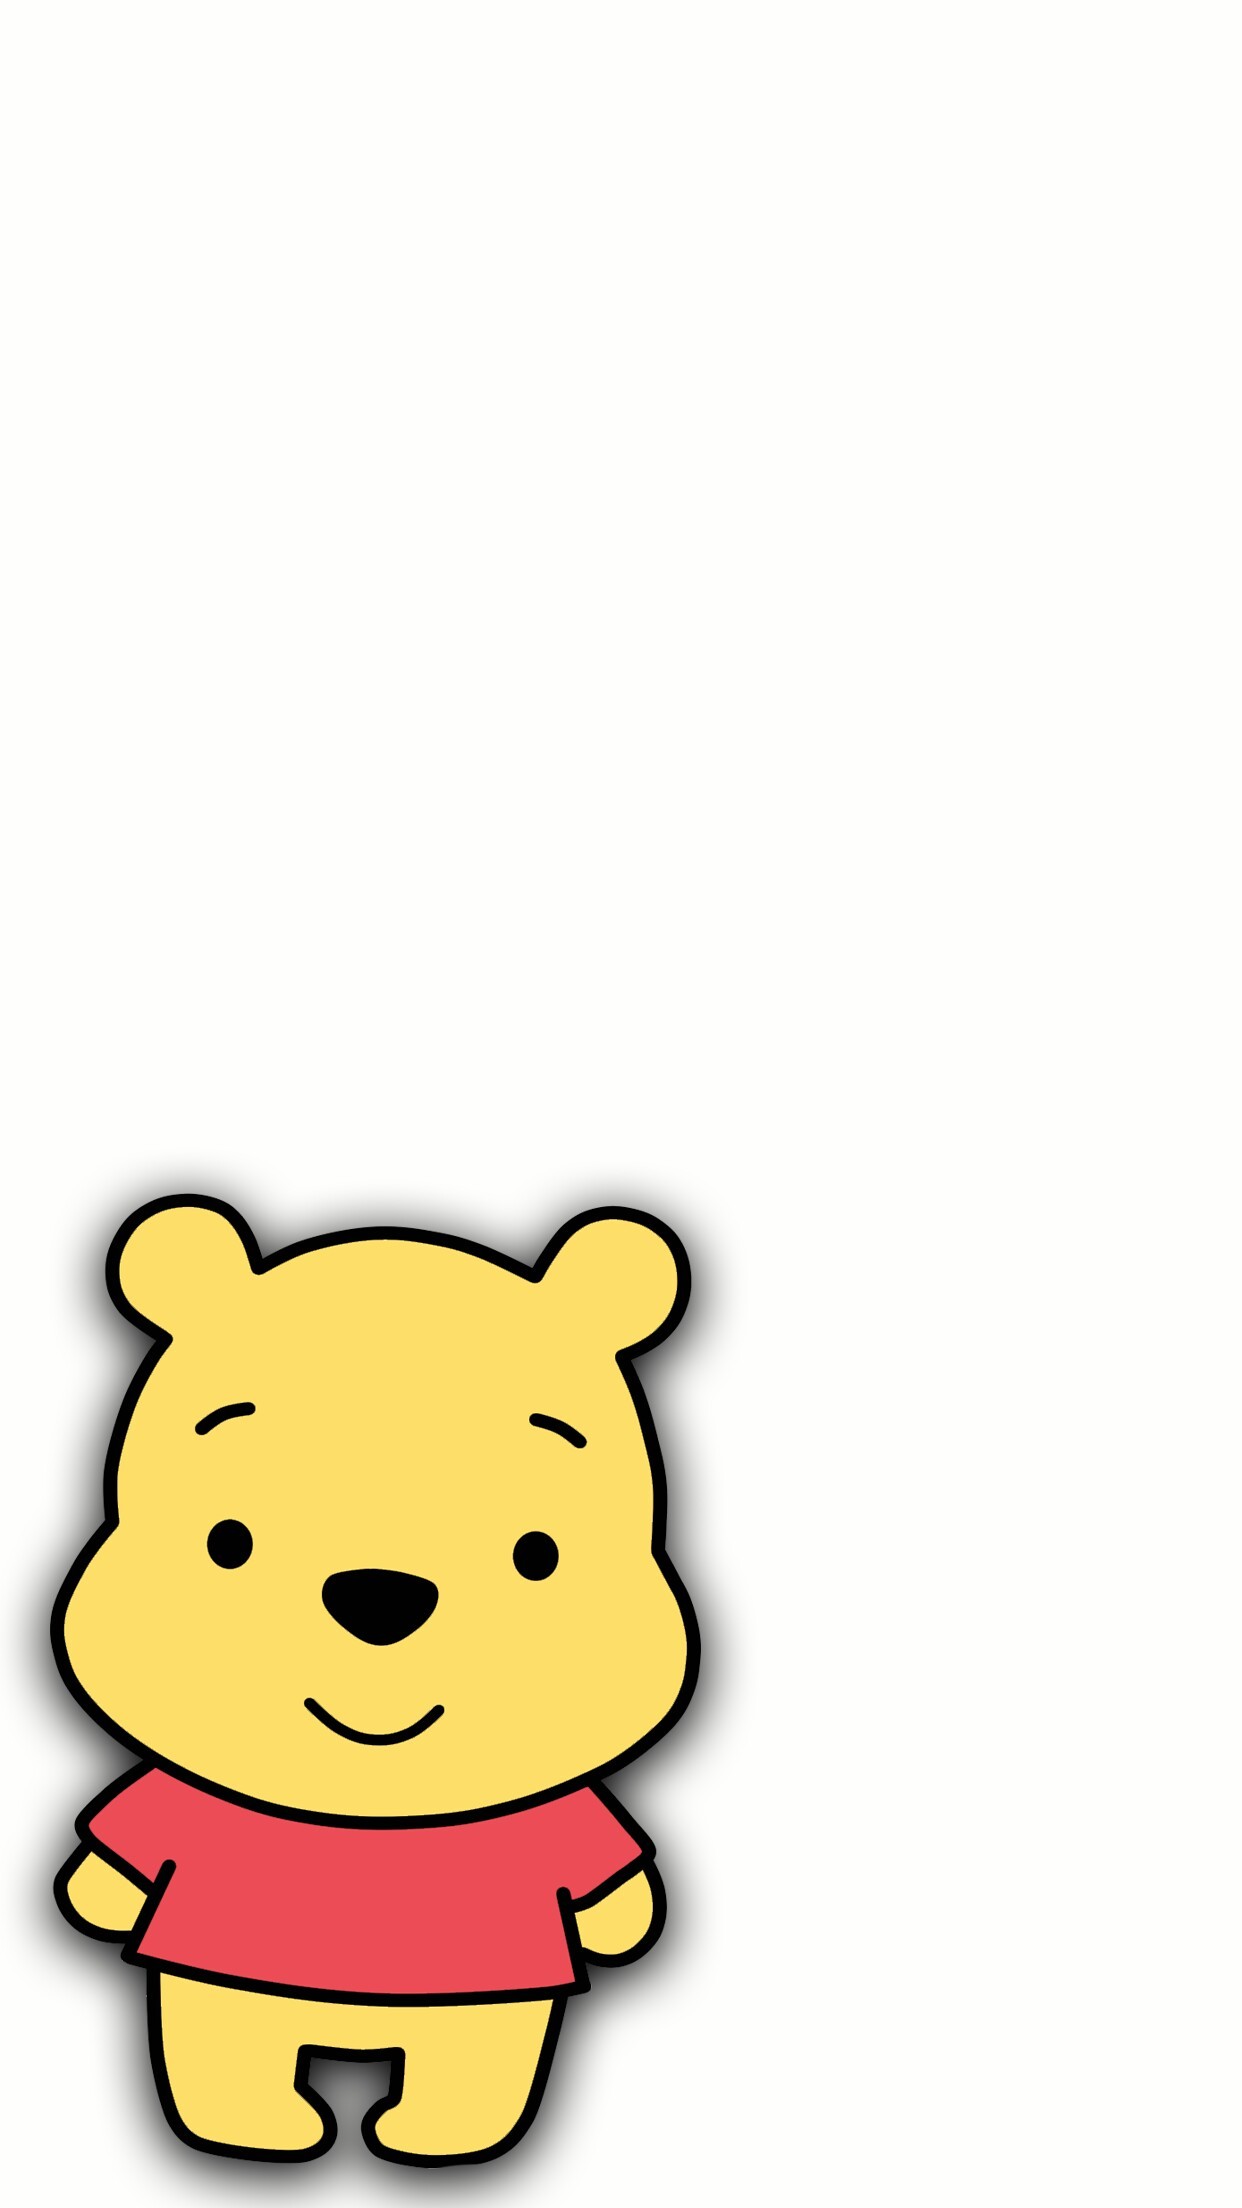 1242x2208 Bear Wallpaper, Hd Wallpaper Android, Wallpaper Backgrounds, Iphone  Wallpapers, Tumblers, Pooh Bear, Wall Papers, Backgrounds, Wallpapers